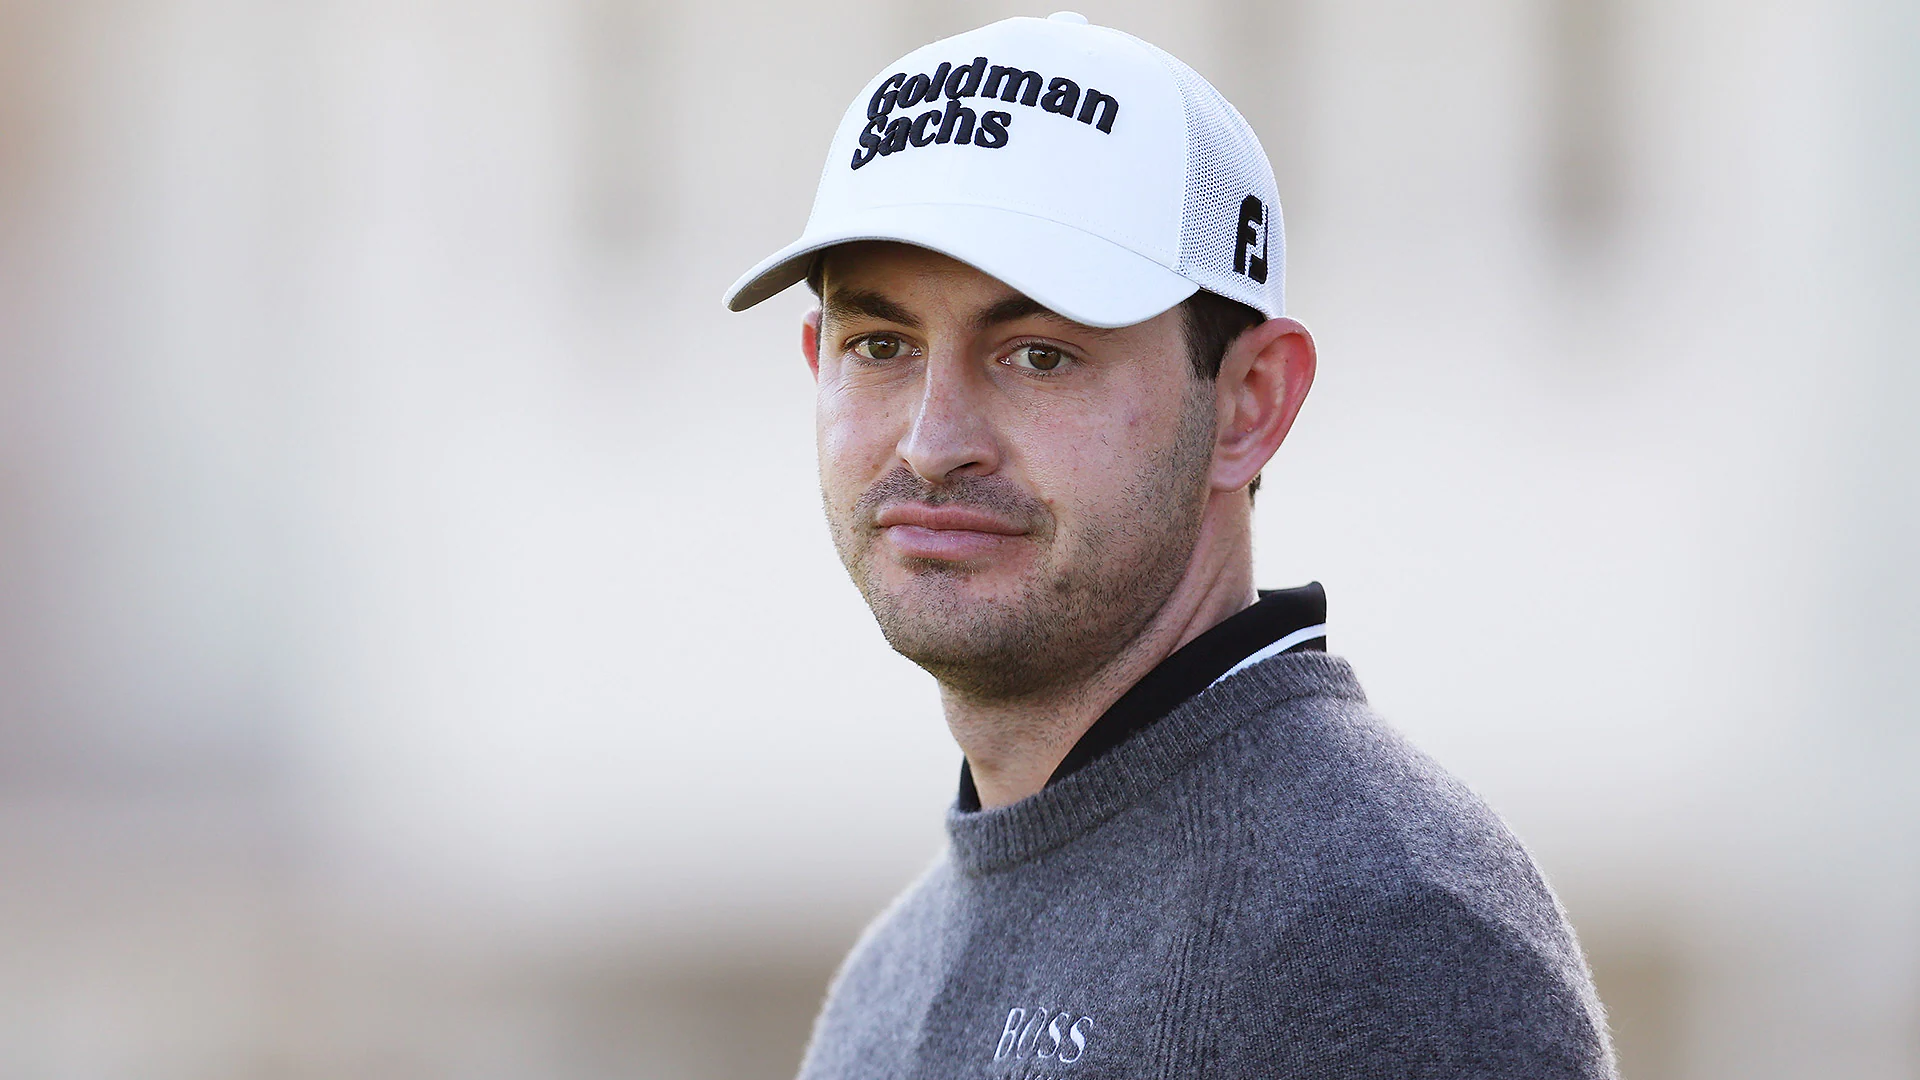 Horse For Course: Patrick Cantlay Opens with 66 at RBC Heritage